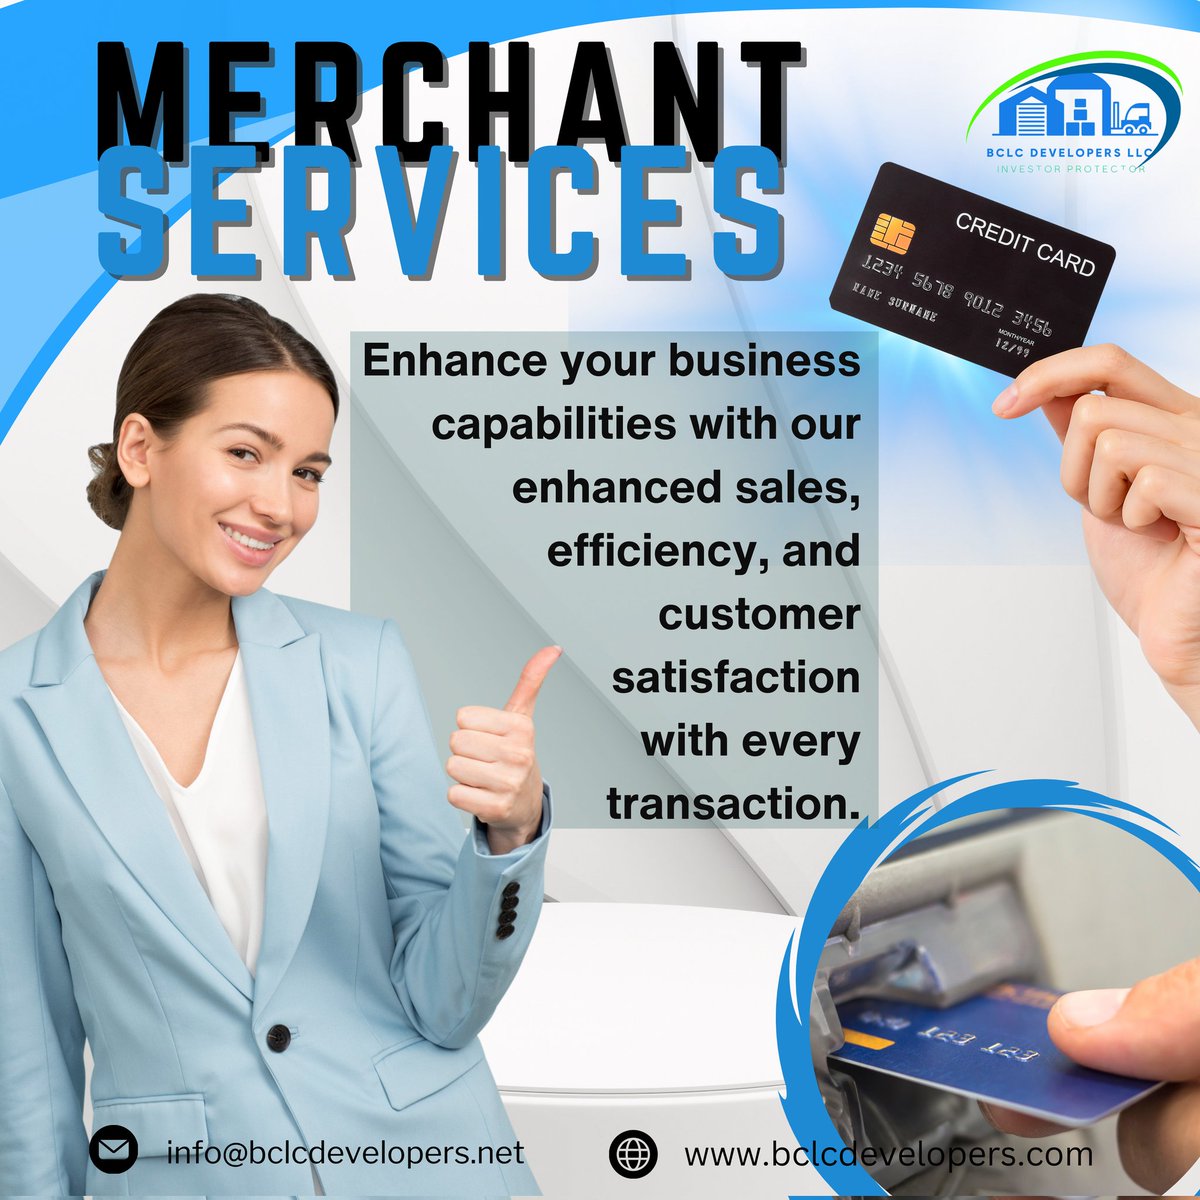 Expanding BCLC Developers horizons, we are excited to announce the addition of merchant services to our suite of offerings. 🤩 
#merchantservices #bclcdevelopers #jacksonvilleflorida #supportlocalbusiness